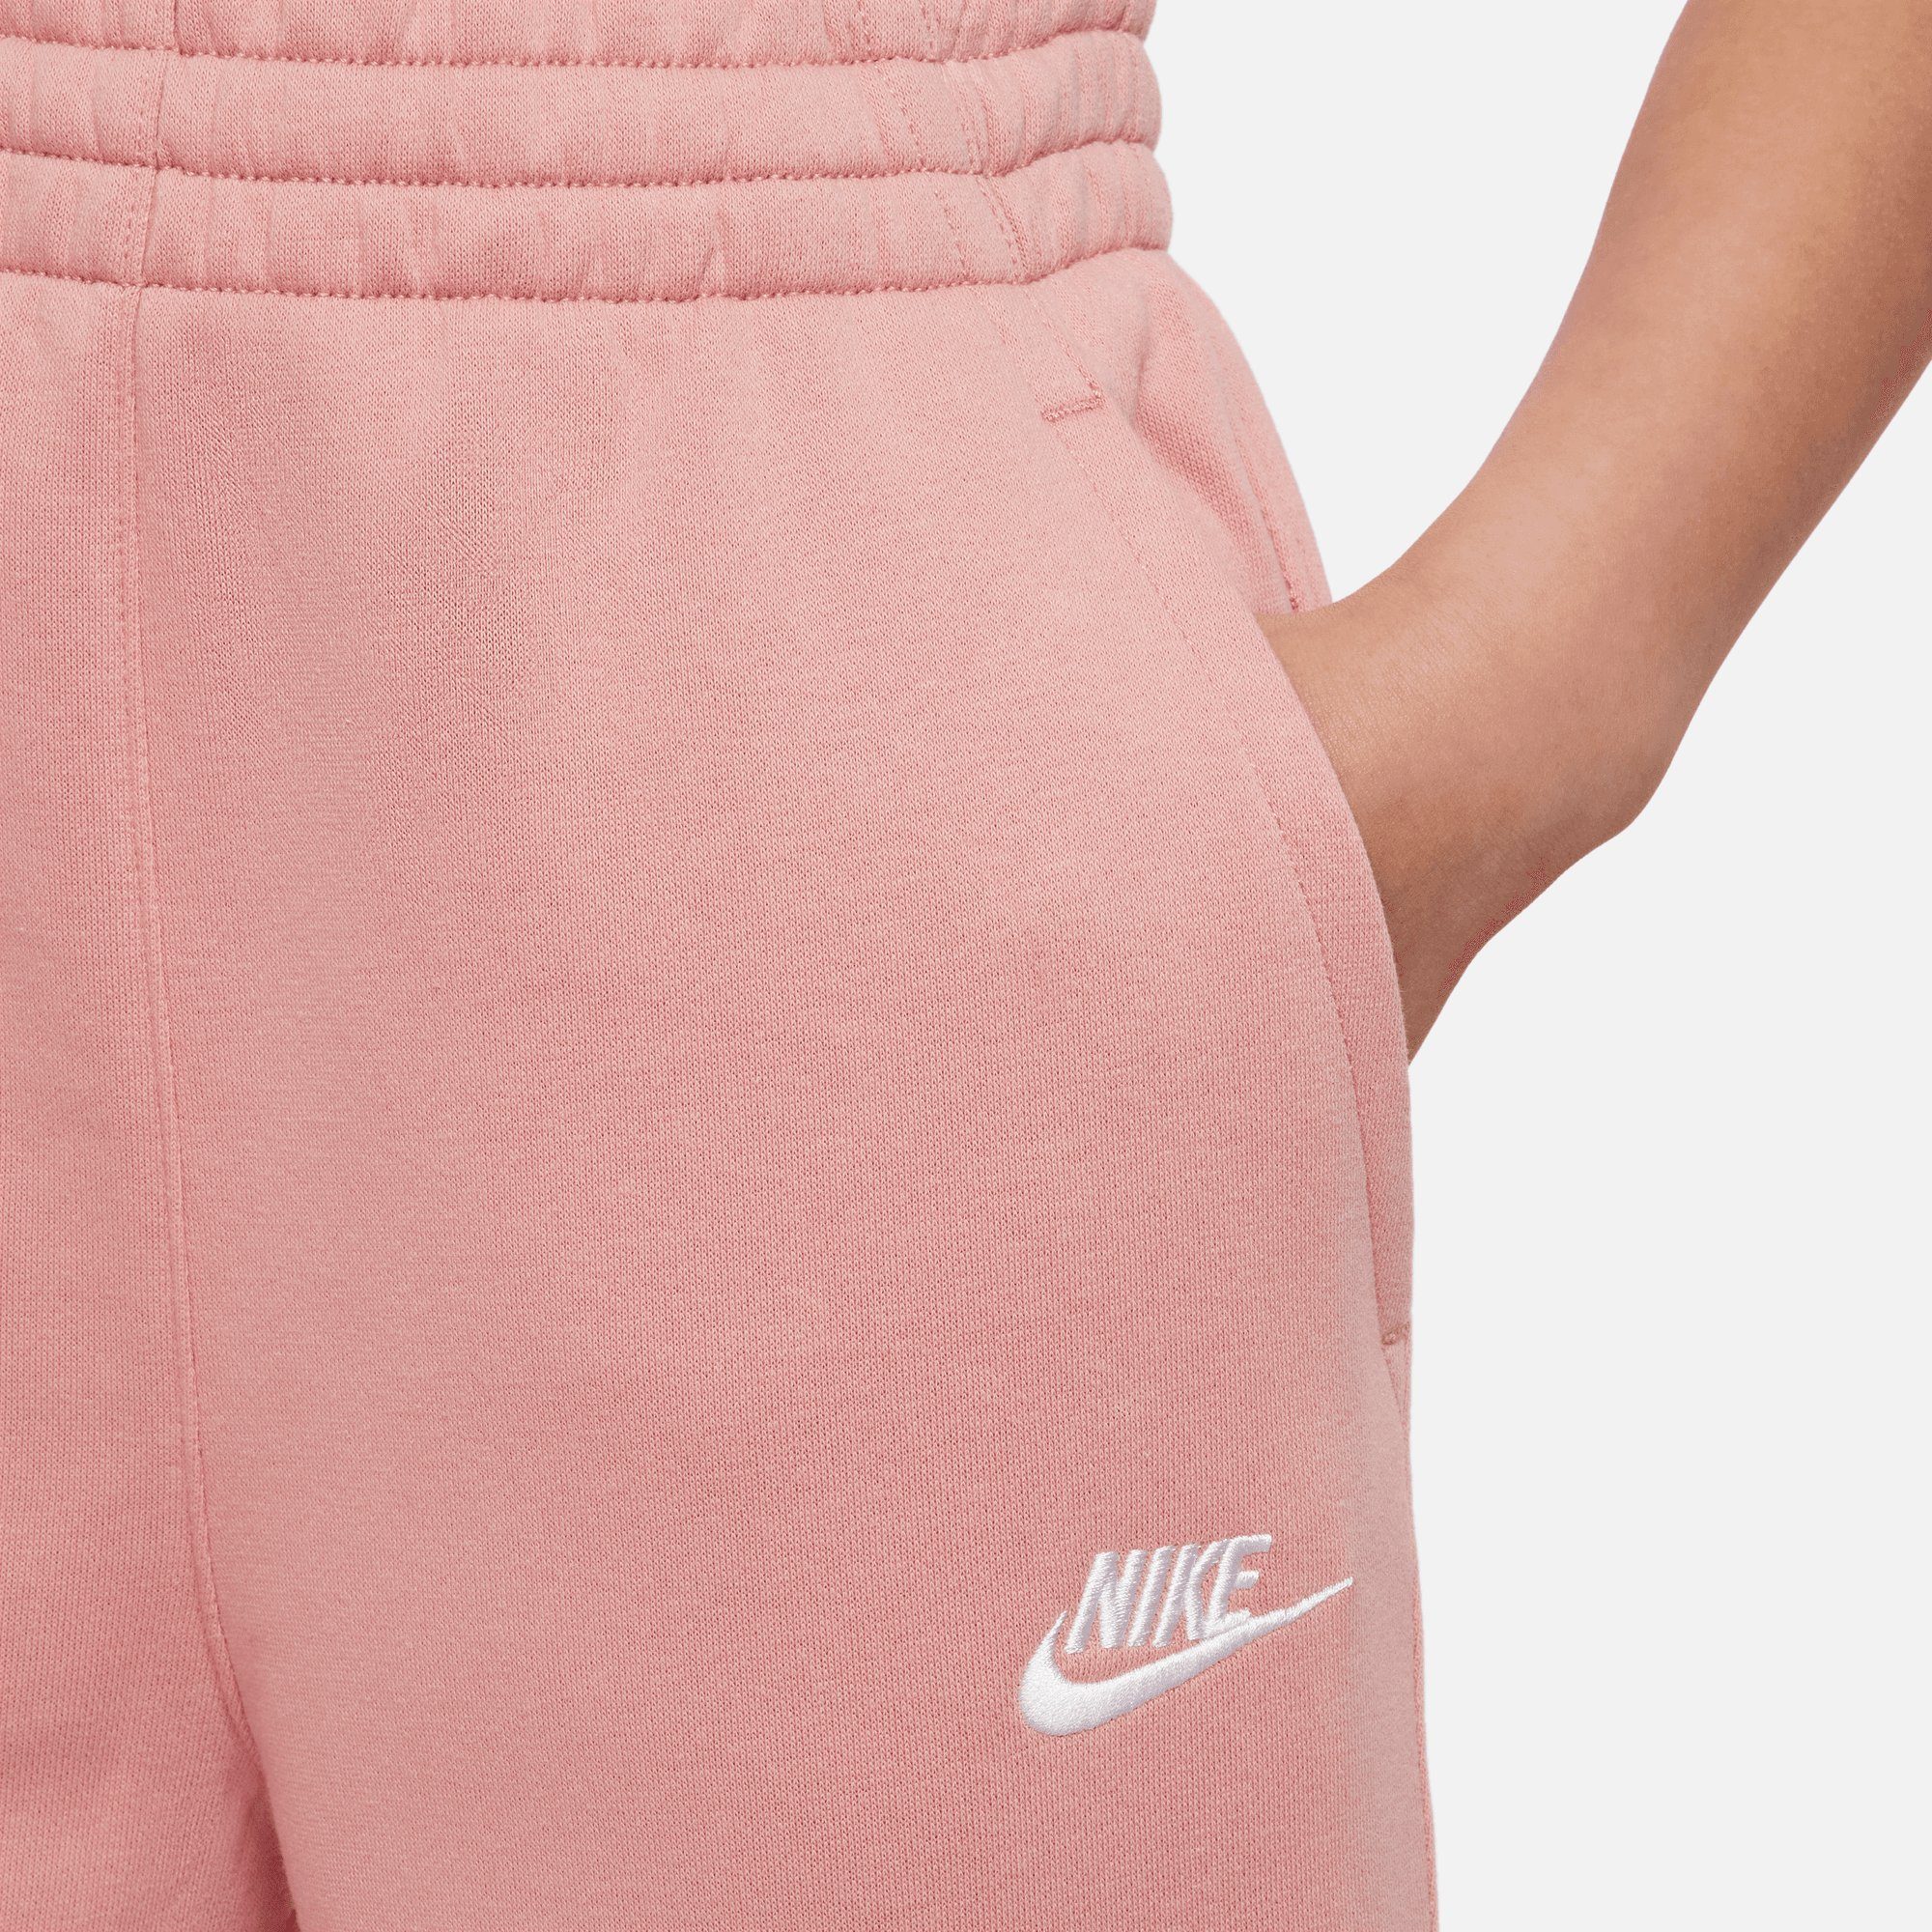 CLUB RED FLEECE PANTS Nike Sportswear STARDUST/WHITE (GIRLS) KIDS' STARDUST/RED Jogginghose HIGH-WAISTED BIG FITTED